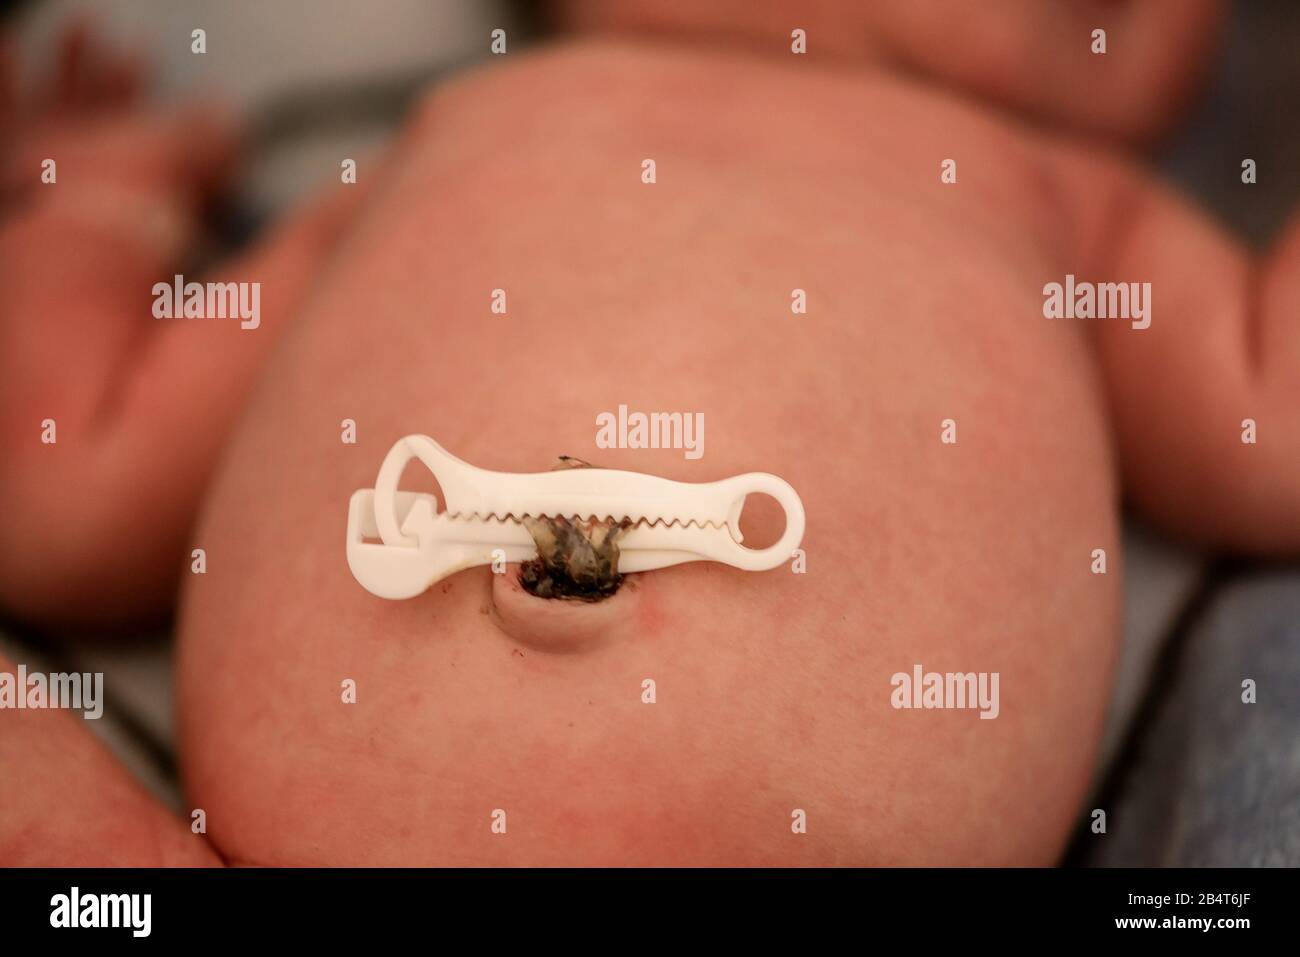 Newborn baby boy laying on the bed with umbilacal cord clamp Stock Photo